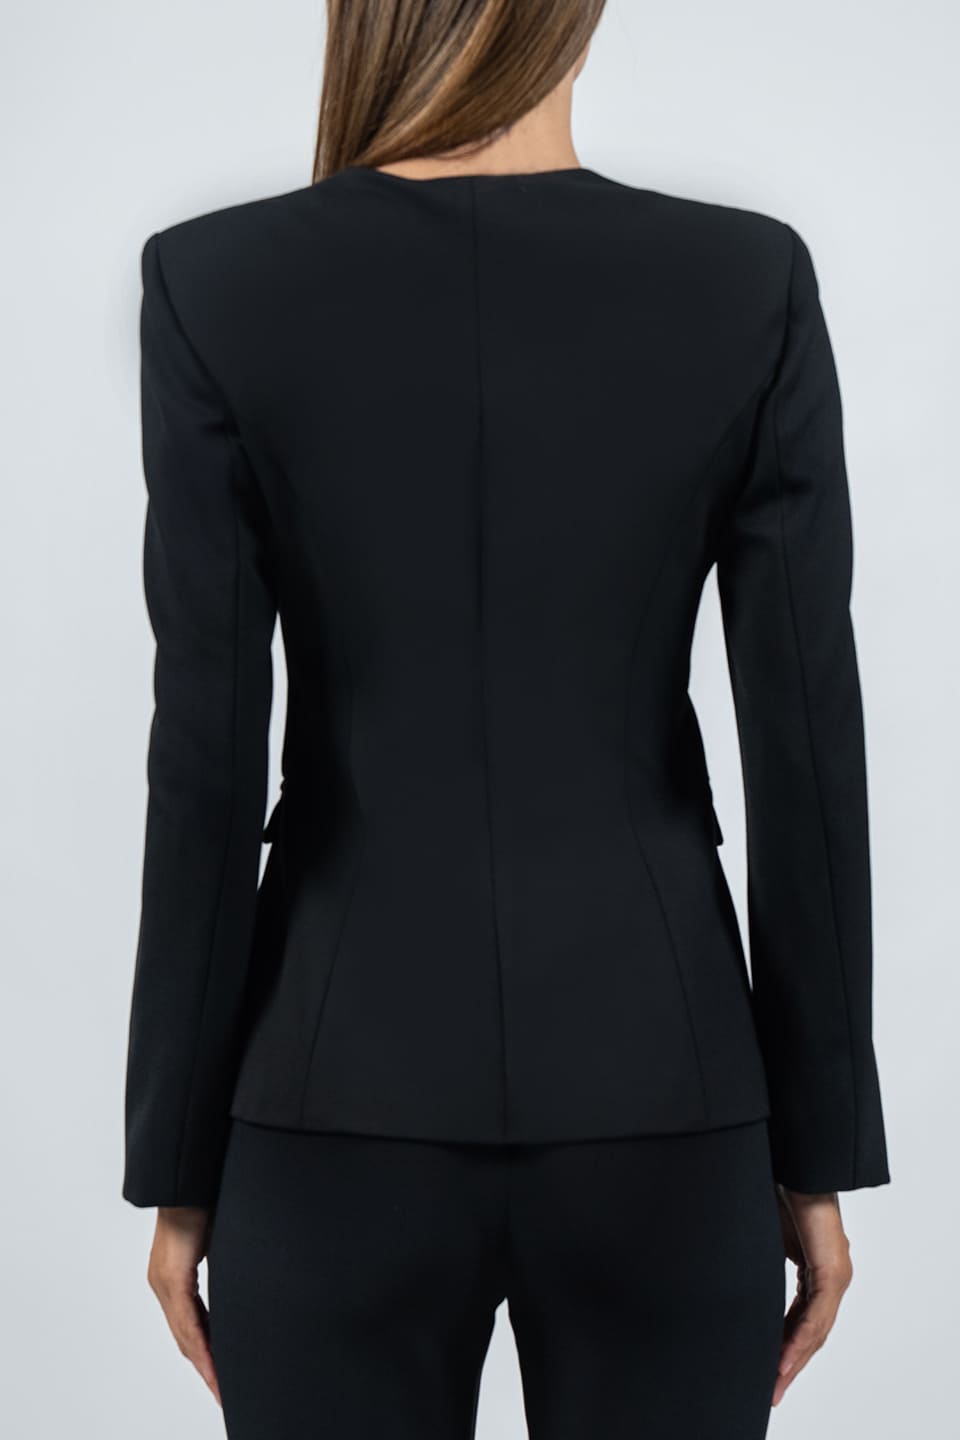 Thumbnail for Product gallery 3, Black Corset Jacket